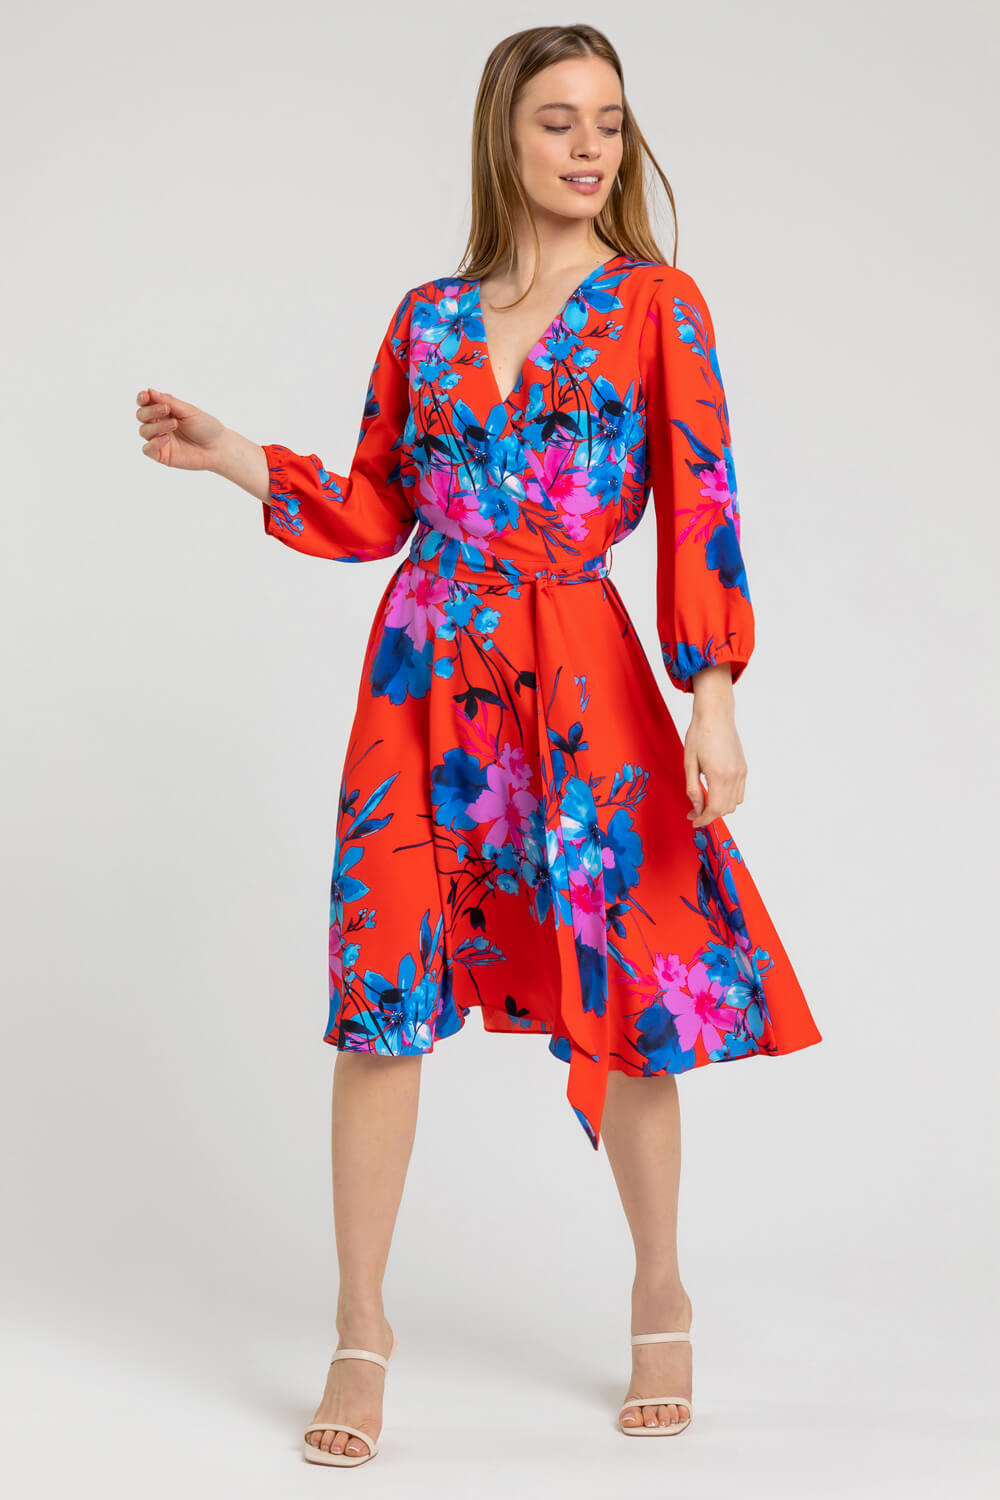 Red Petite Floral Fit & Flare Dress, Image 3 of 4